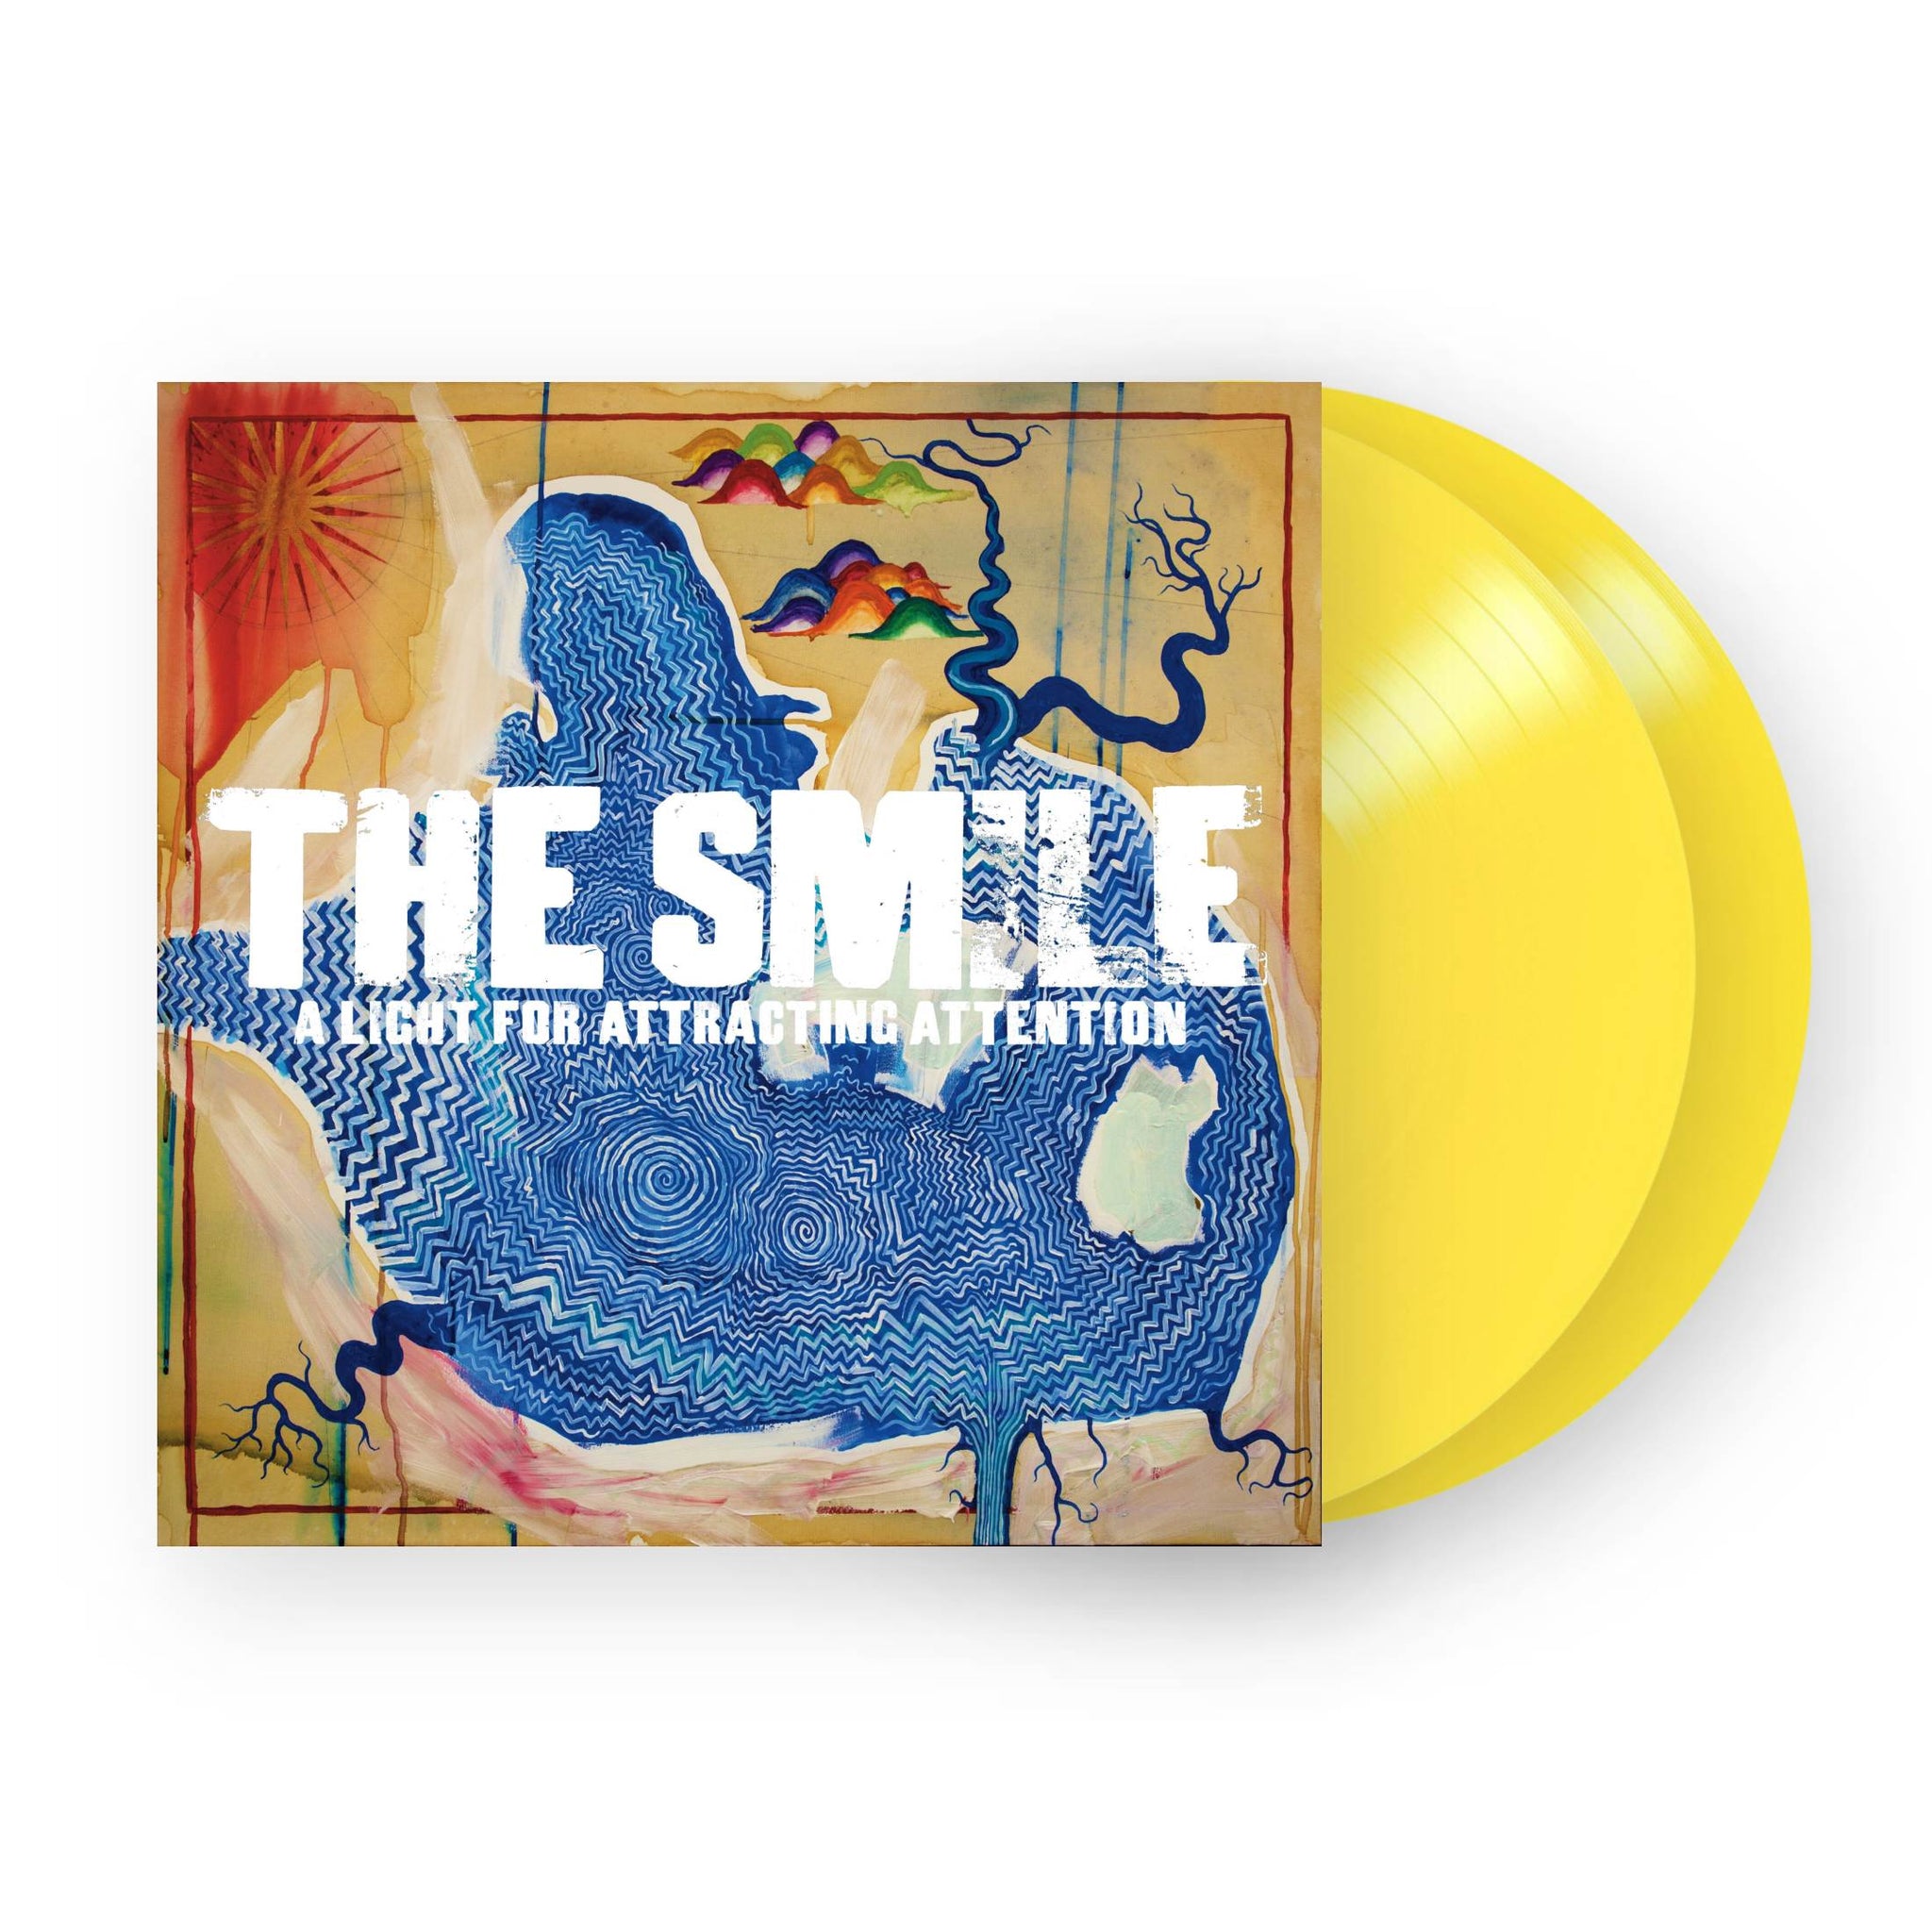 The Smile  - A Light For Attracting Attention 2xLP (Yellow Vinyl)